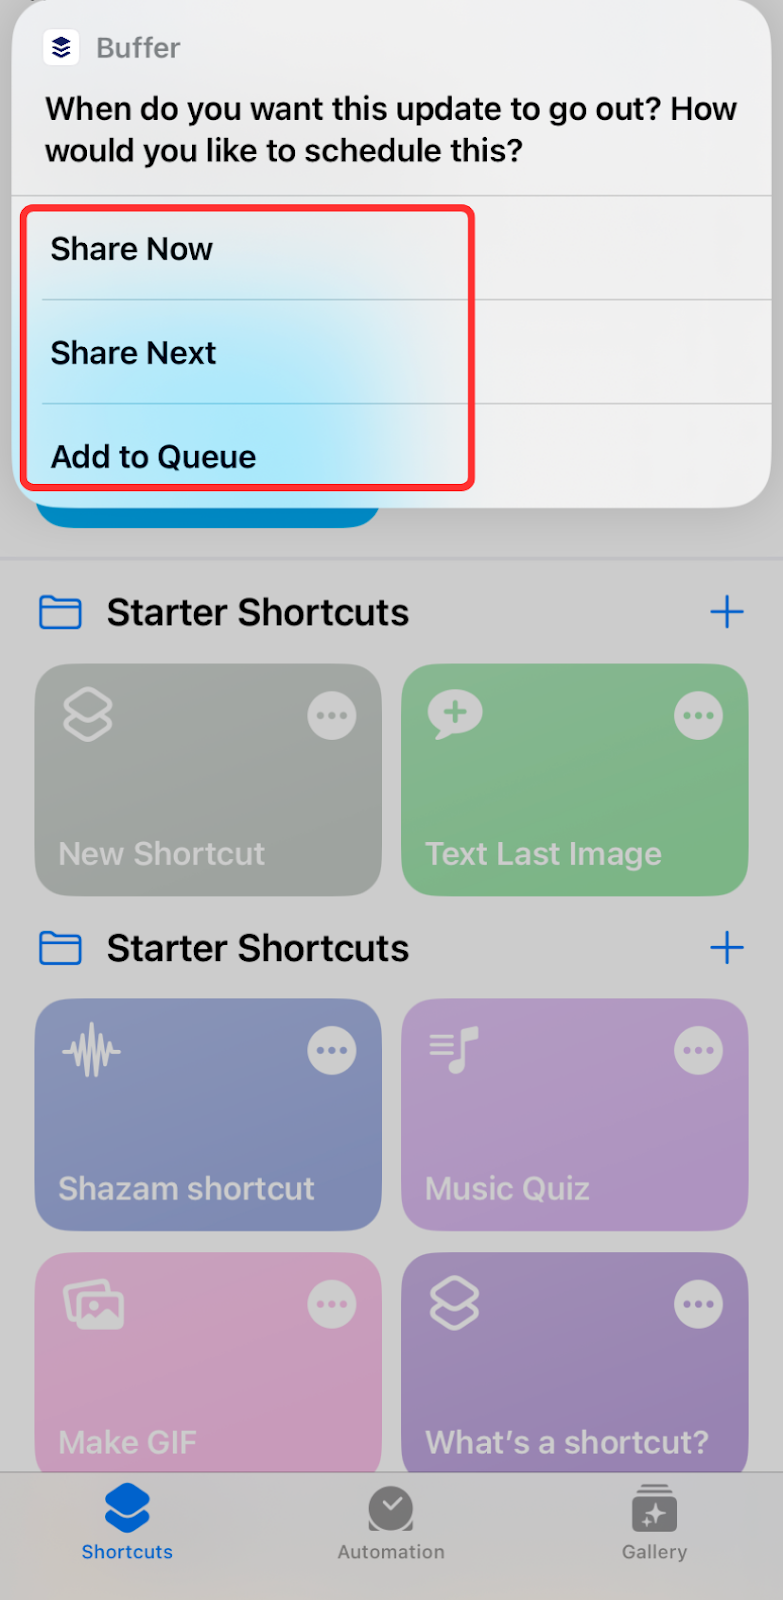 A screenshot showing how to schedule to Bluesky using Apple's shortcuts and Buffer